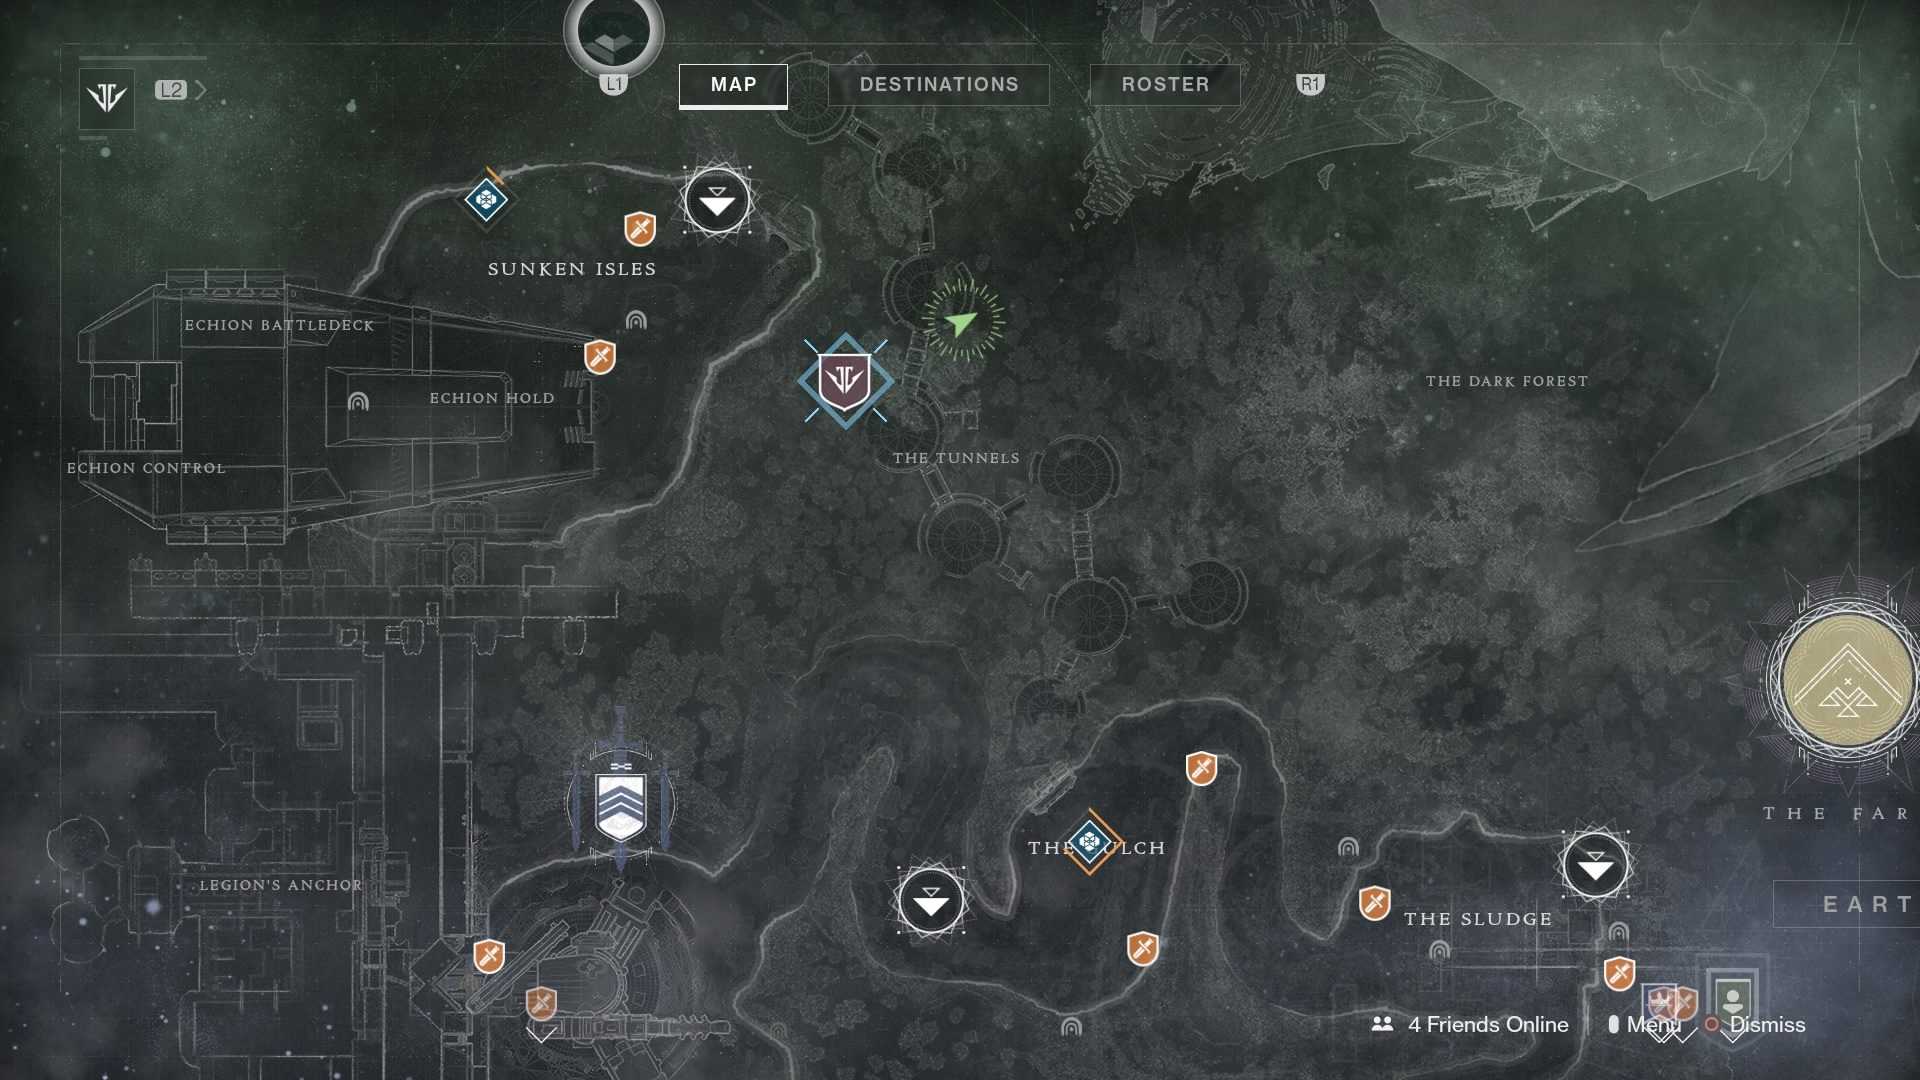 black armory, black armory forge locations, Destiny 2, destiny 2 forge, destiny 2 forge locations, forge destiny 2, forge locations, forge locations destiny 2, izanami forge location, volundr forge location